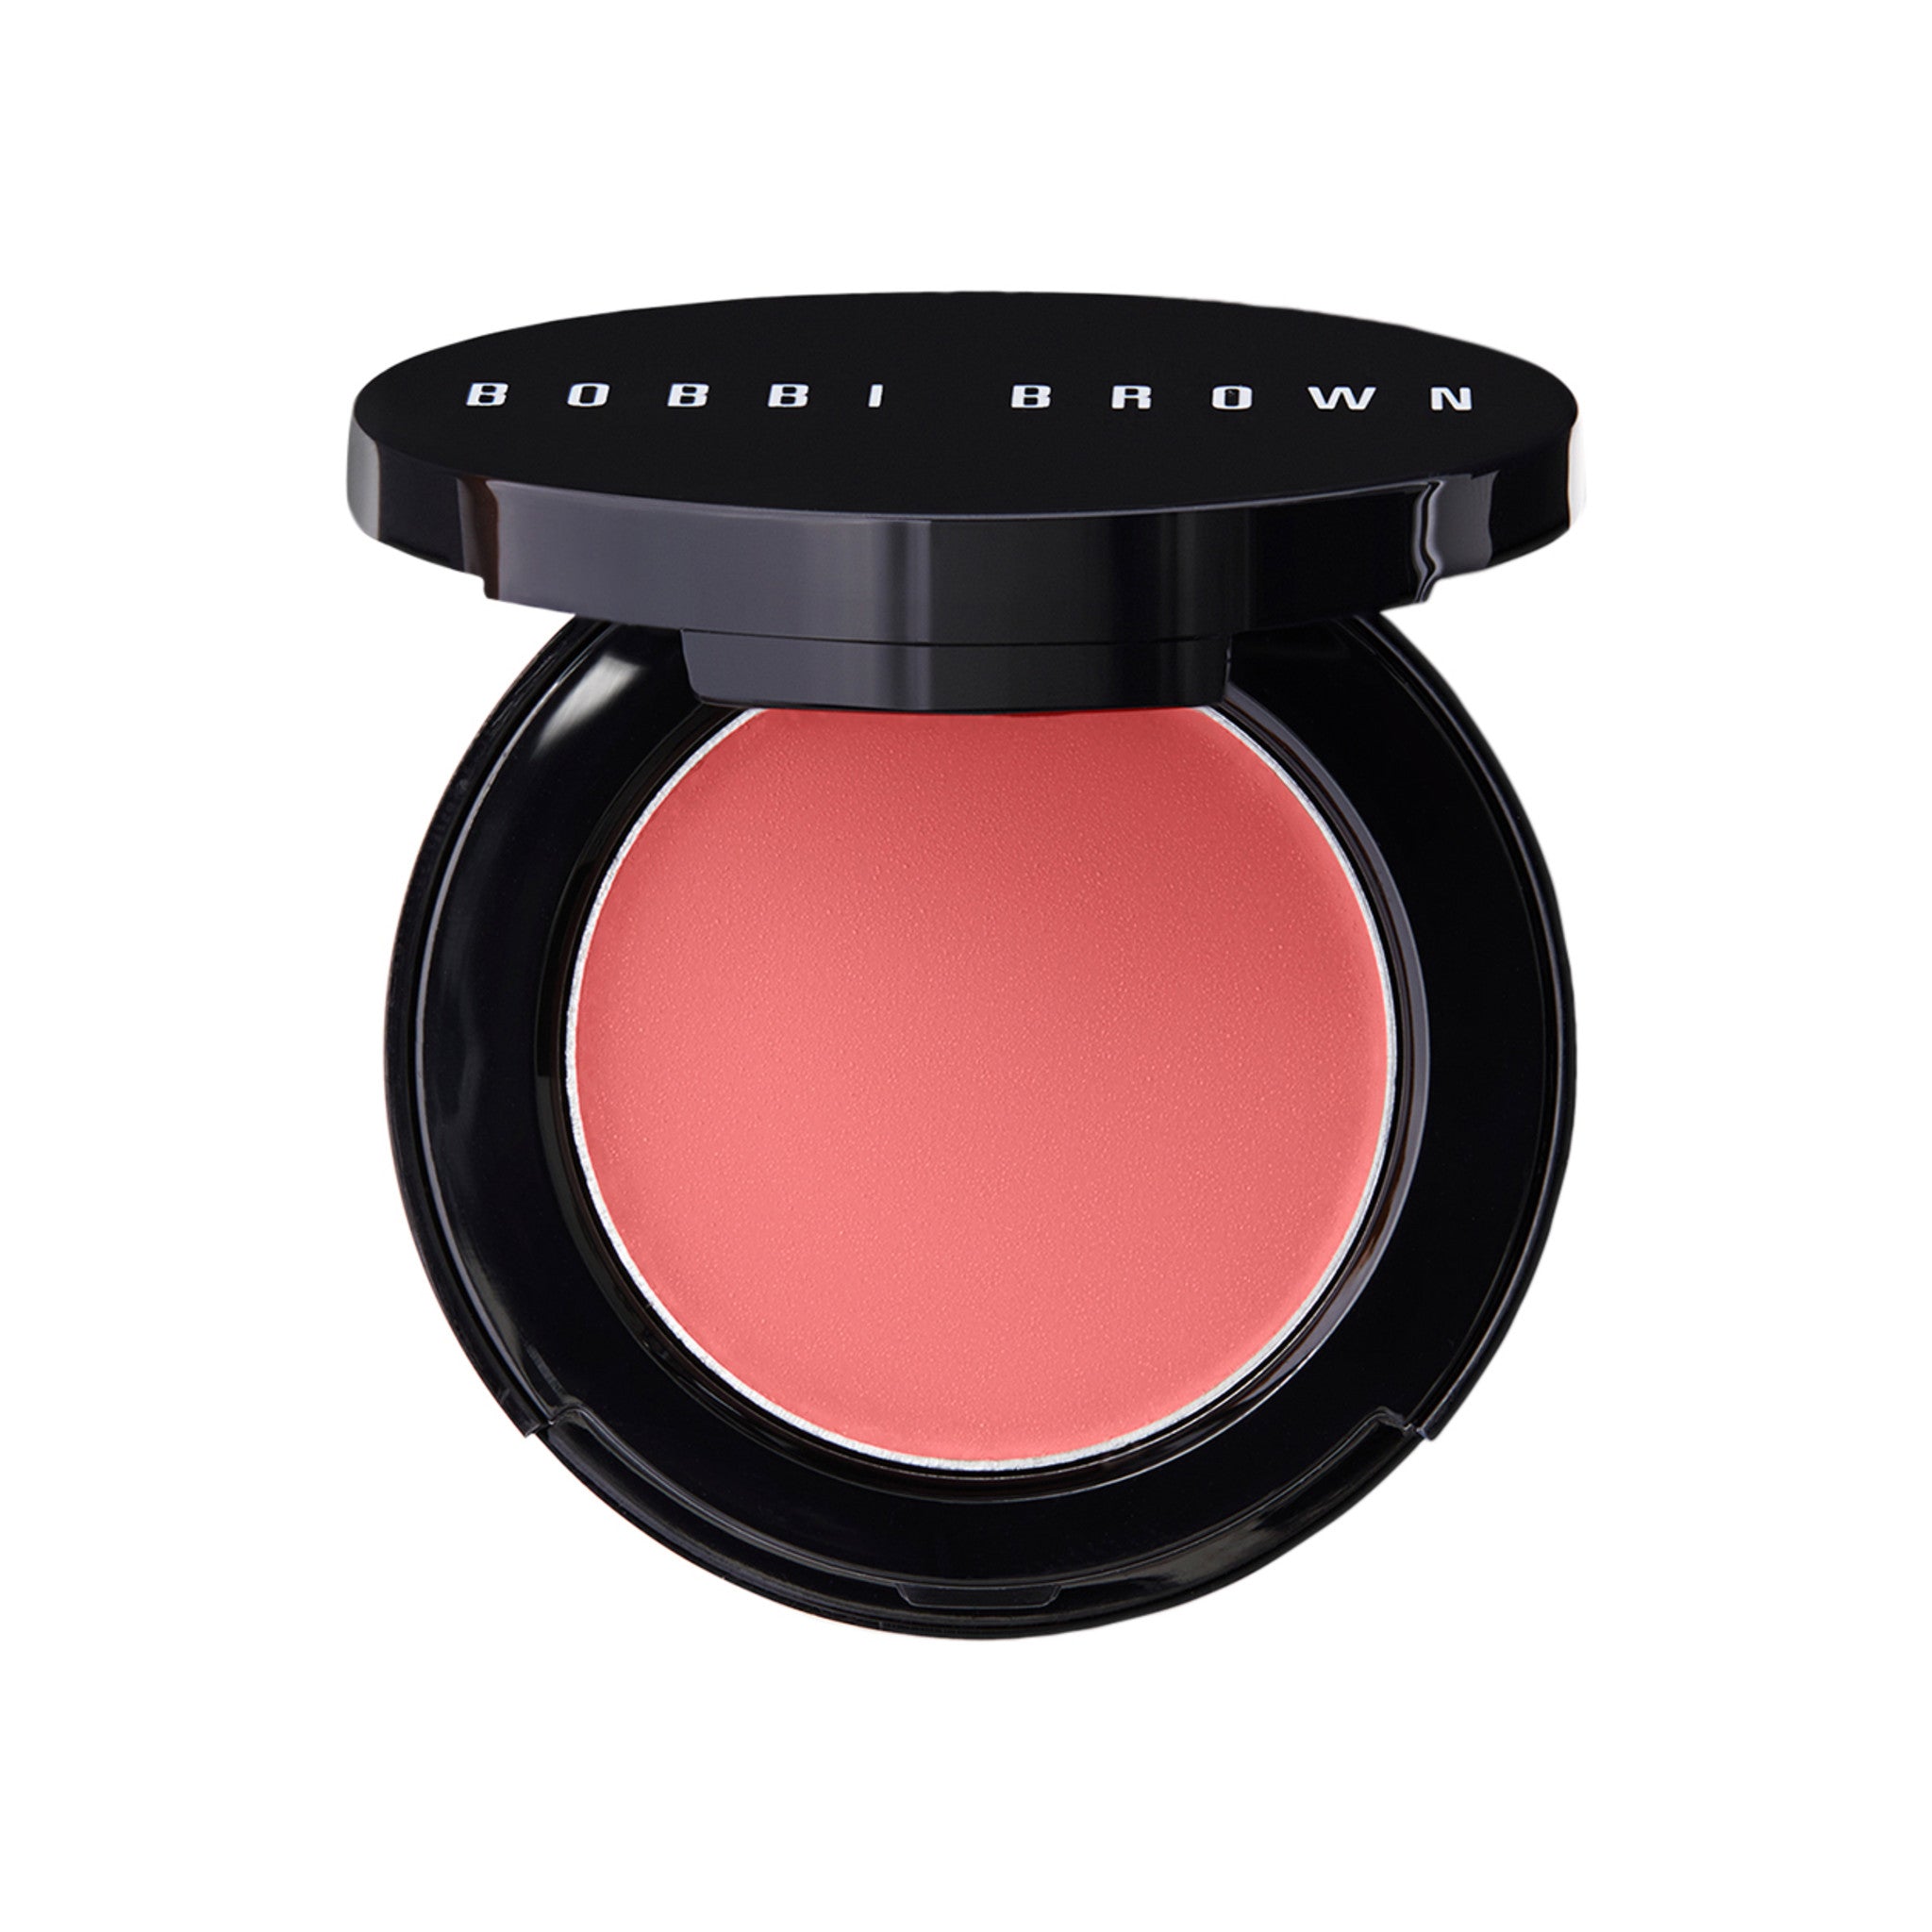 Bobbi Brown Pot Rouge For Lips and Cheeks Color/Shade variant: Calypso Coral main image.